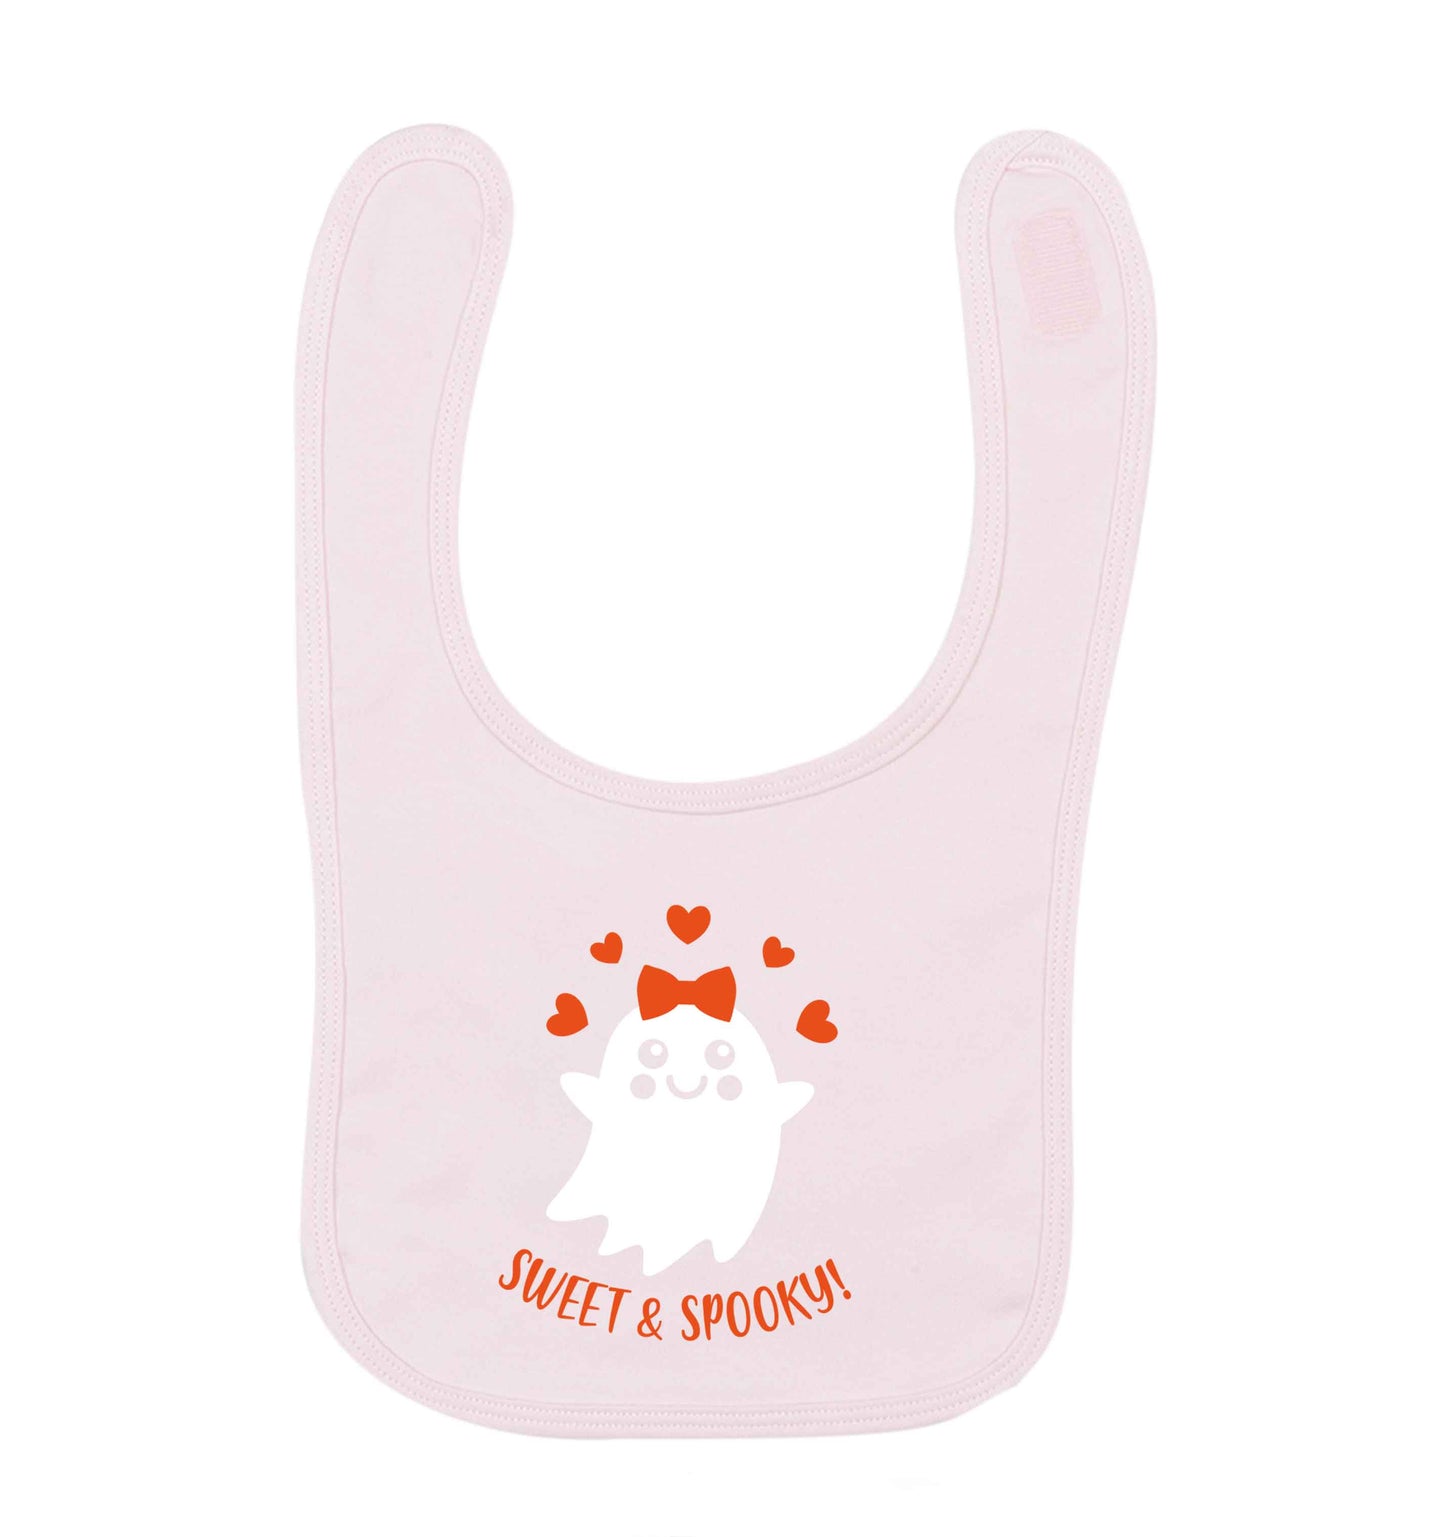 Sweet and spooky pale pink baby bib